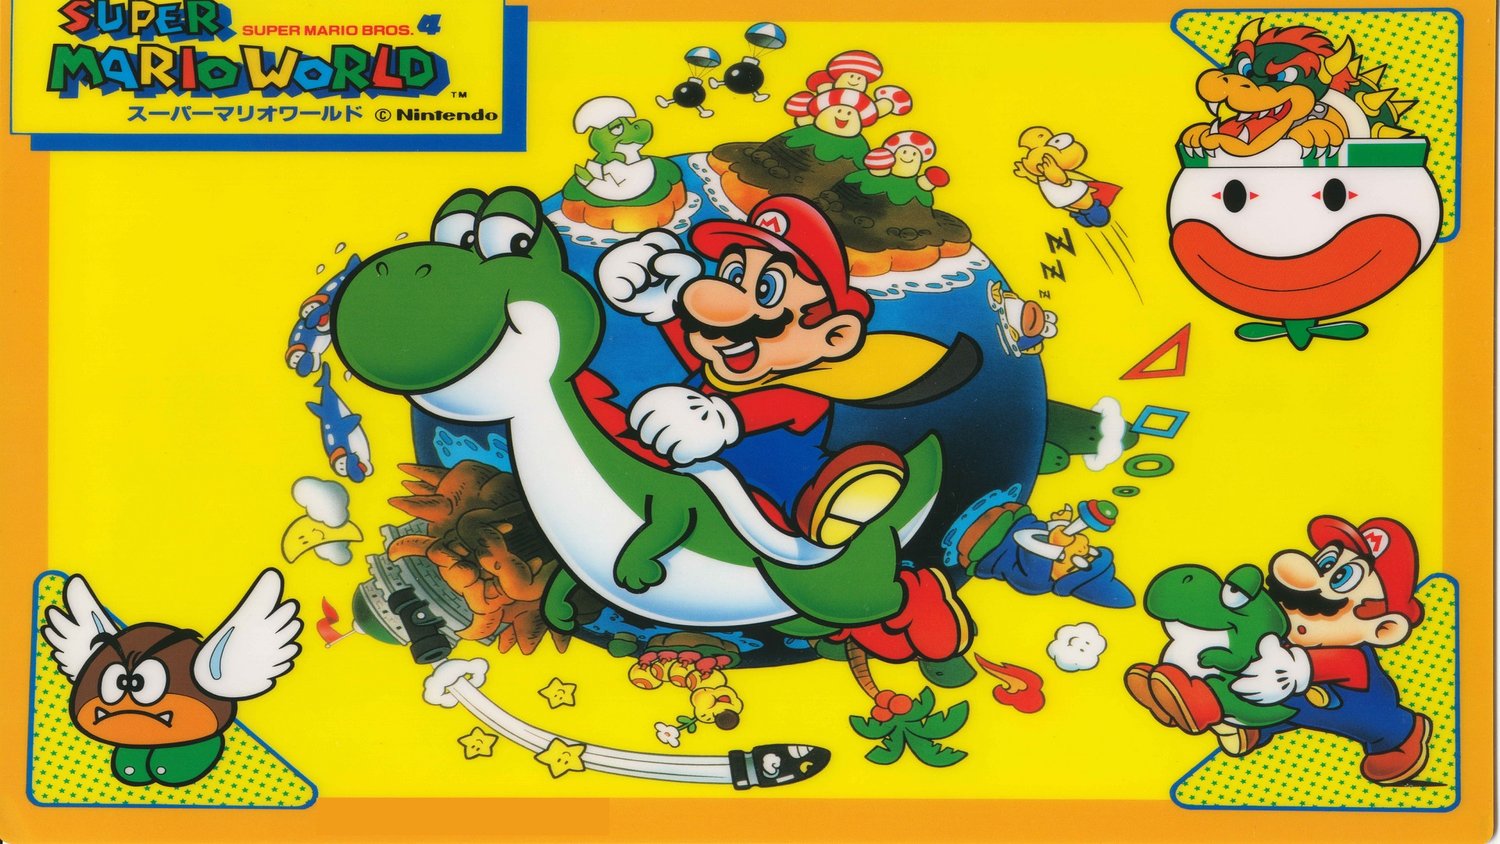 Super Mario World Snes Retro Review: SUPER MARIO WORLD A Game That Stands The Test Of Time —  GameTyrant